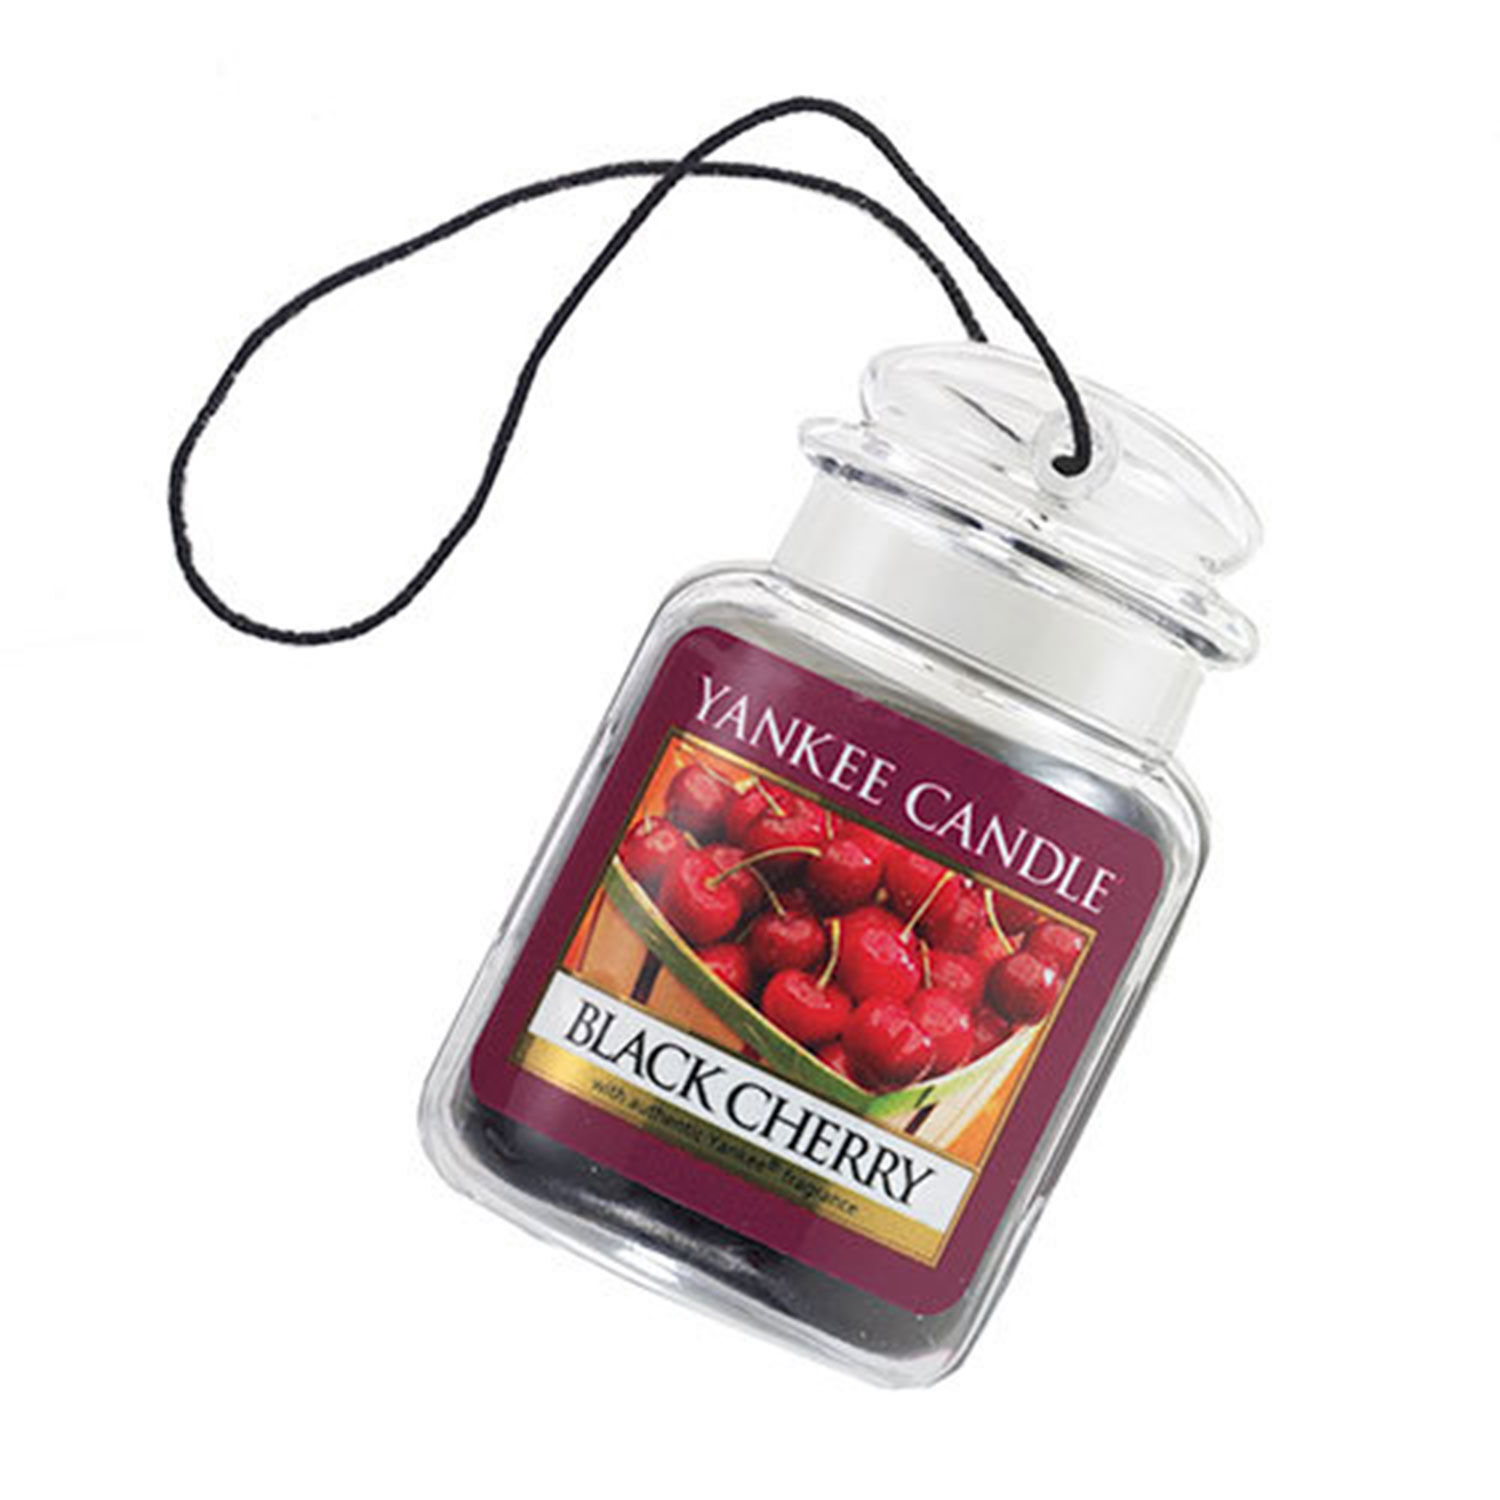 Yankee Candle Black Cherry Car Jar - Home Store + More